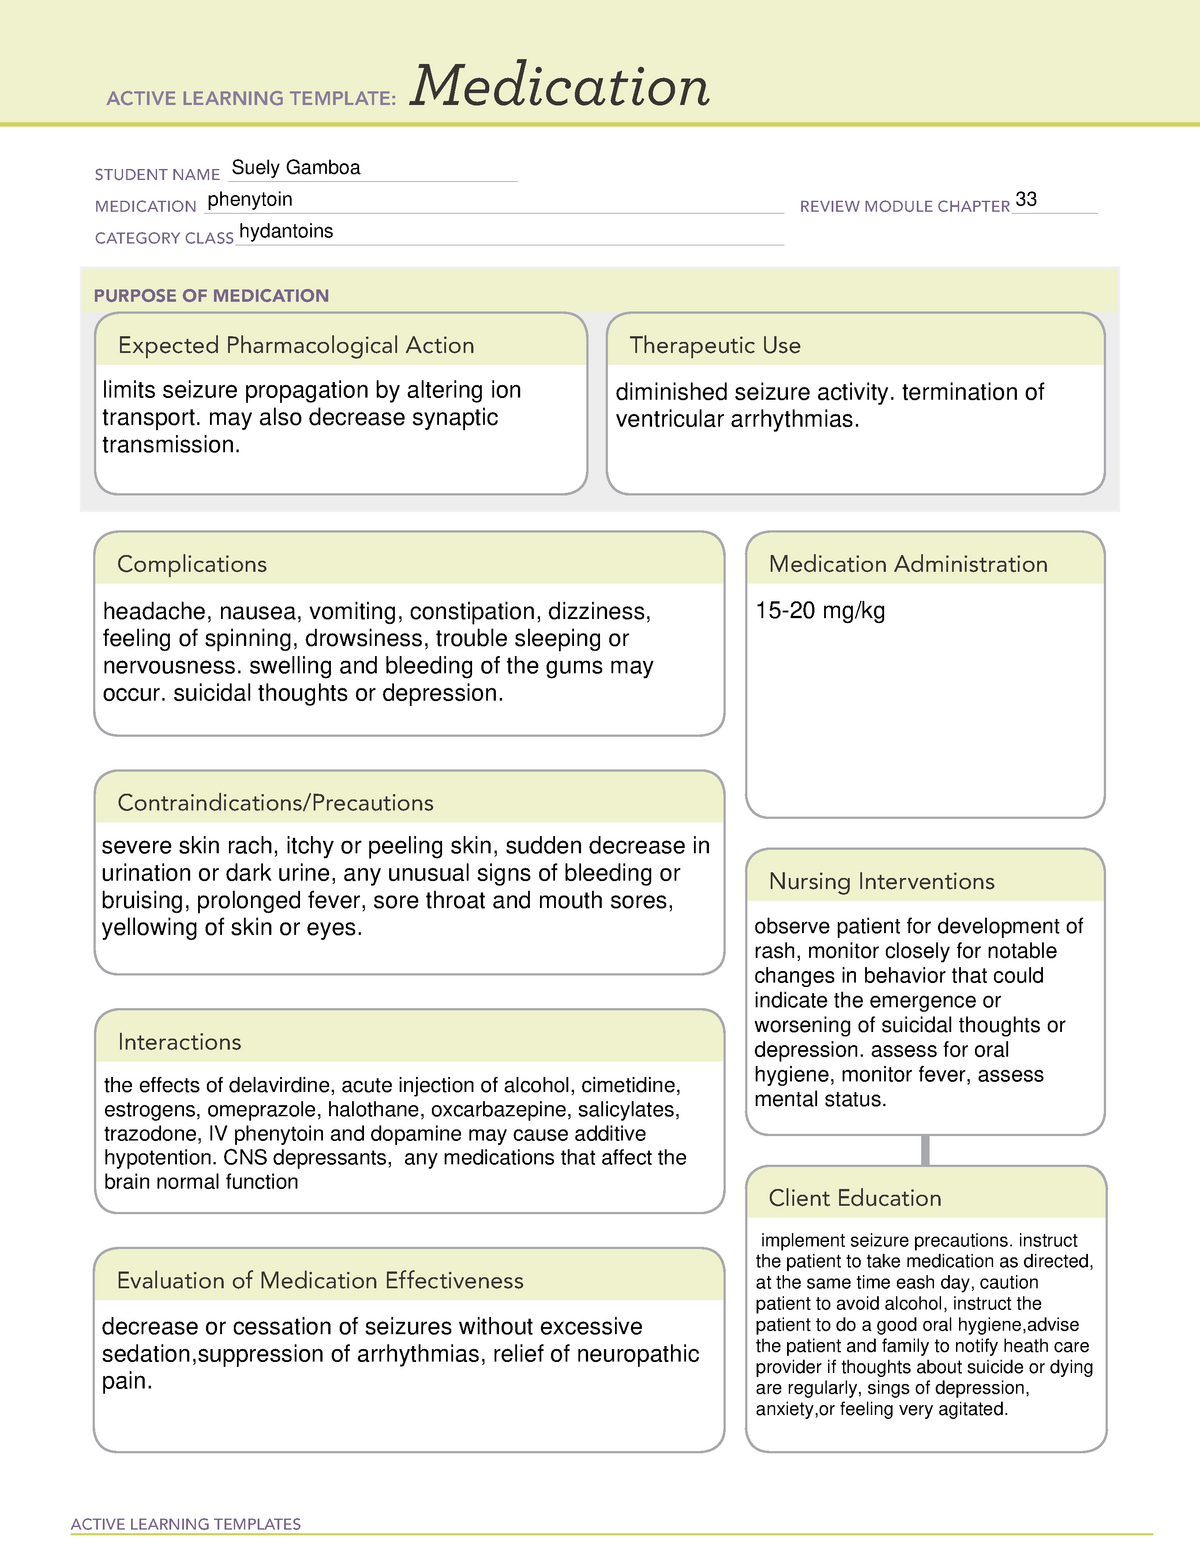 phenytoin-medication-ati-templates-2021-active-learning-templates